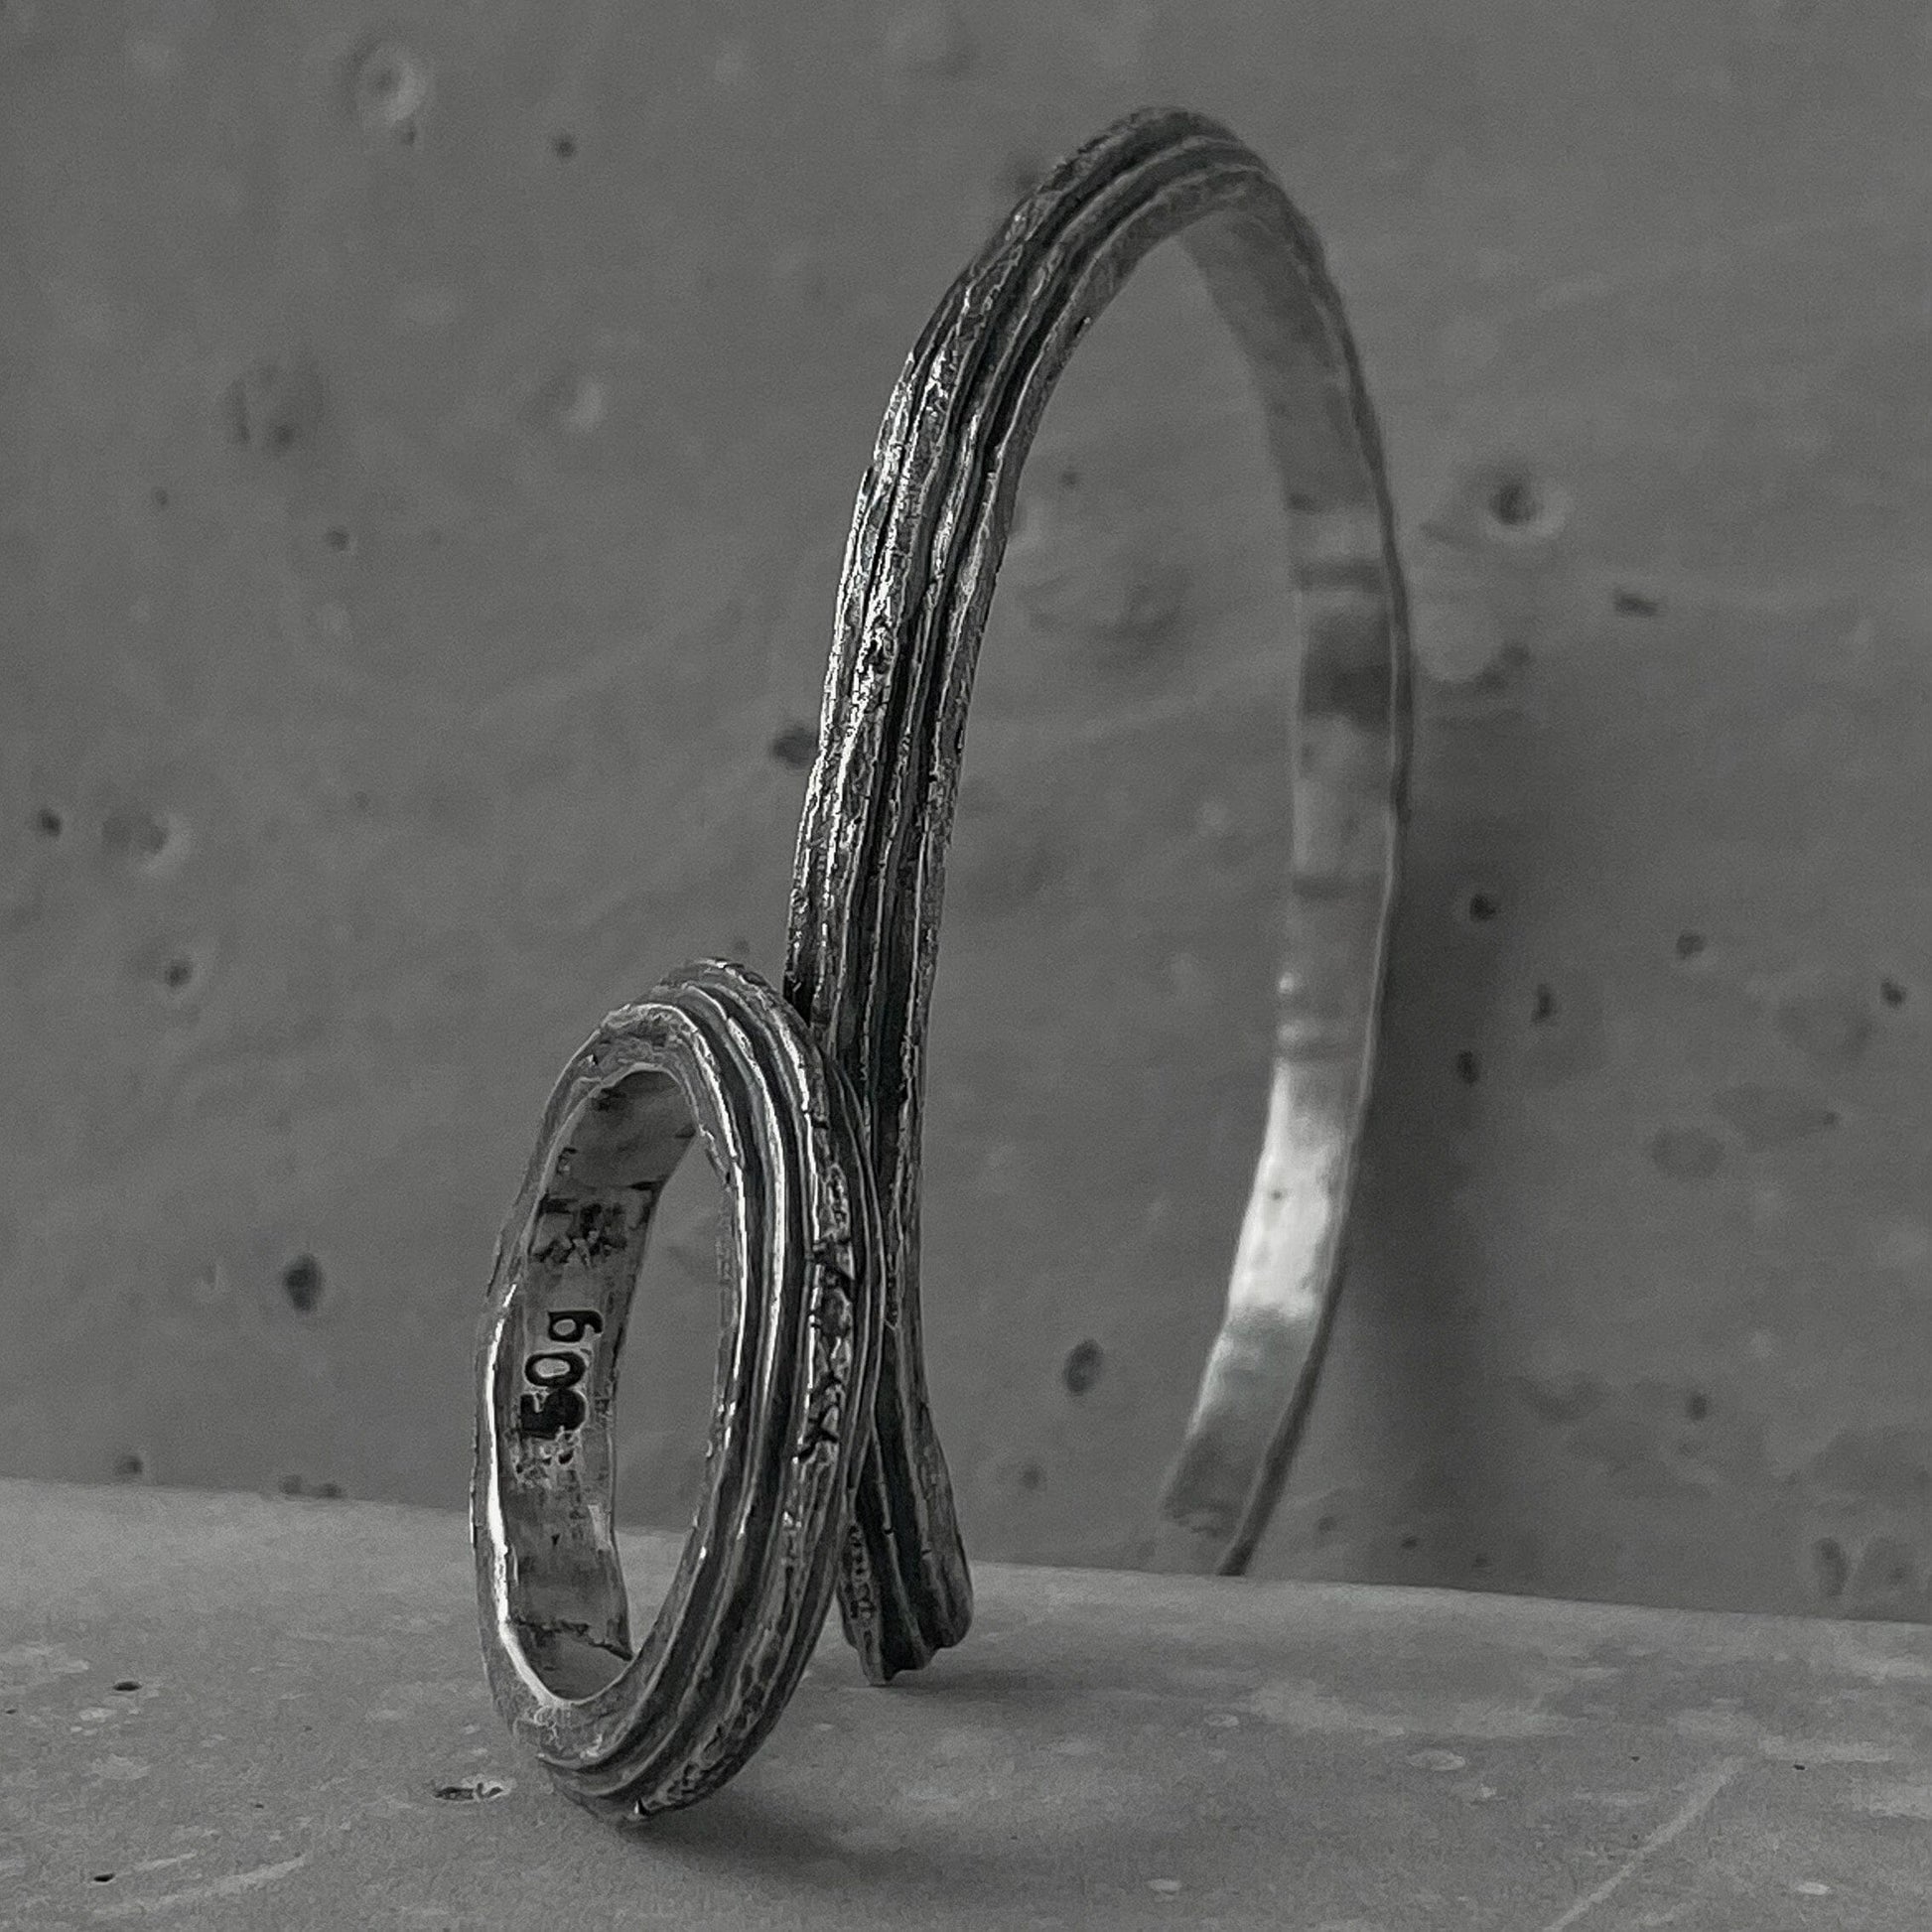 Orbit bangle- thin silver cuff bracelet with unusual hancrafted texture Bracelets Project50g 